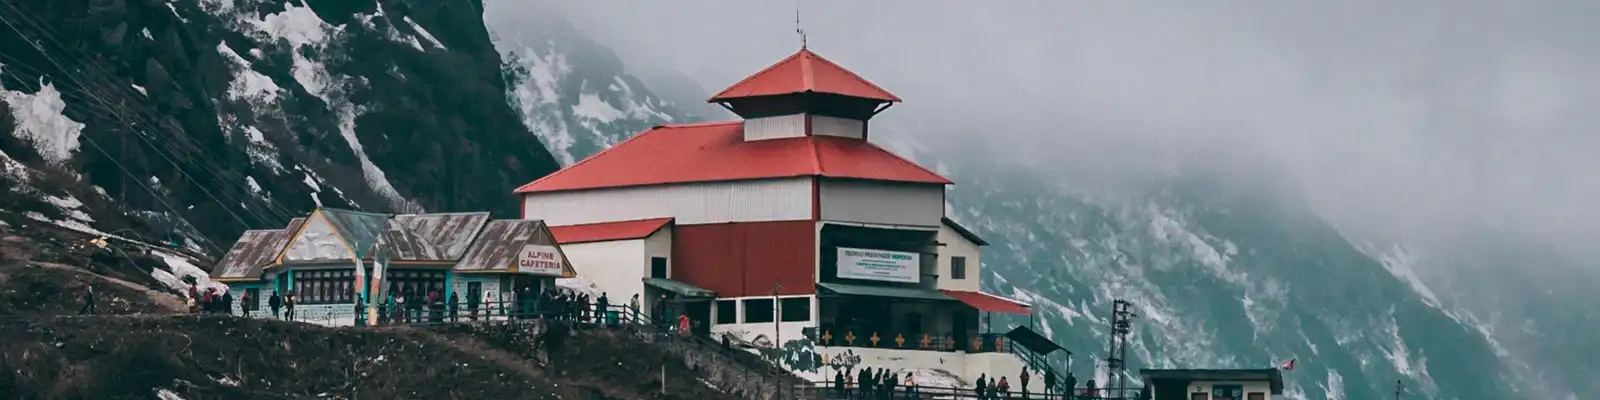 Himachal tour from Delhi with Tourist Hub India - The Best Himachal Tour Operator